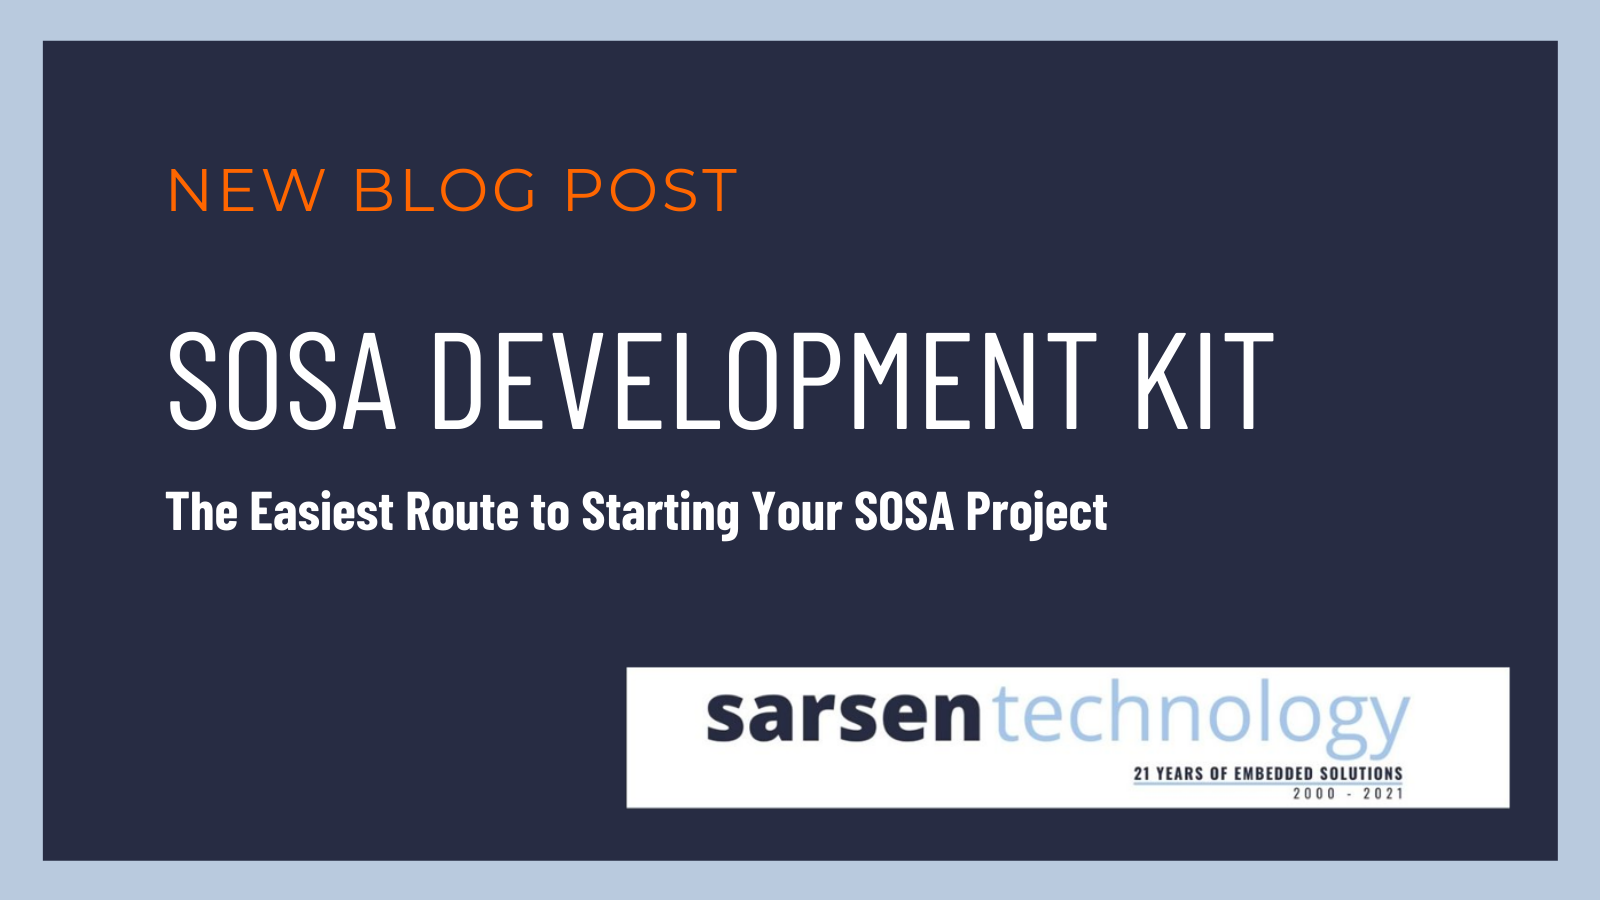 SOSA DEVELOPMENT KIT - The Easiest Route to Starting Your SOSA Project